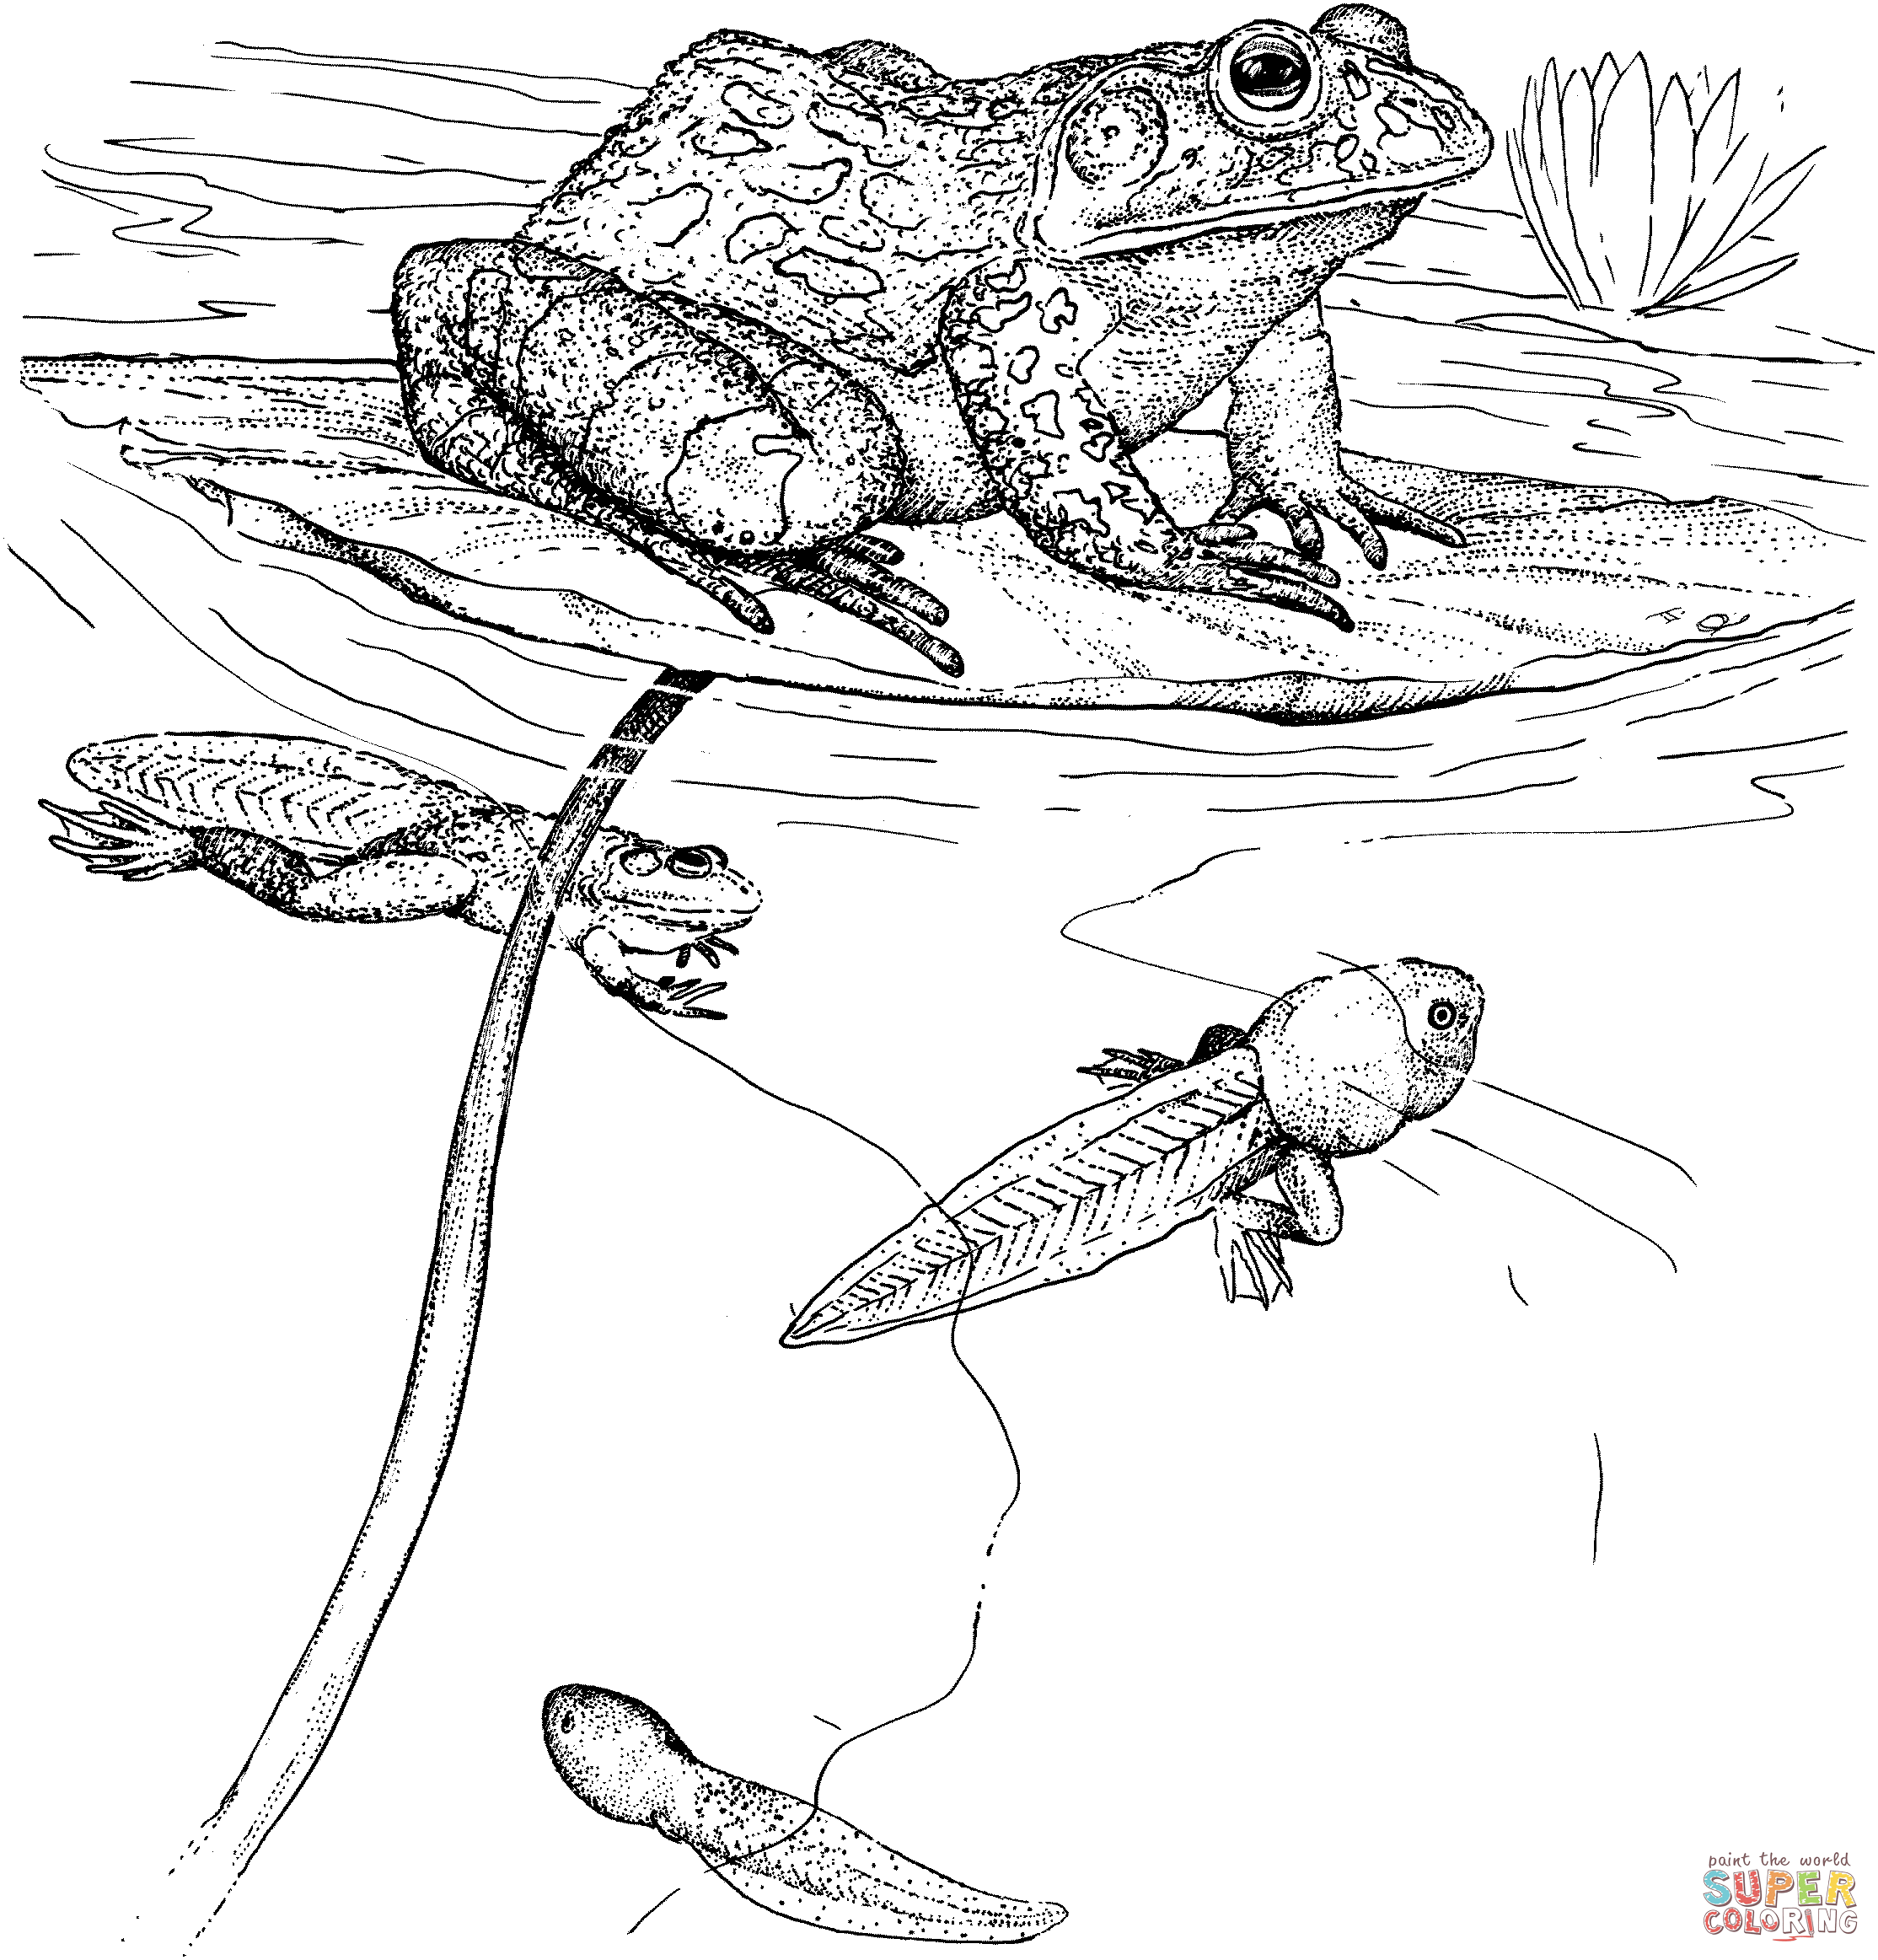 Tadpole coloring #2, Download drawings